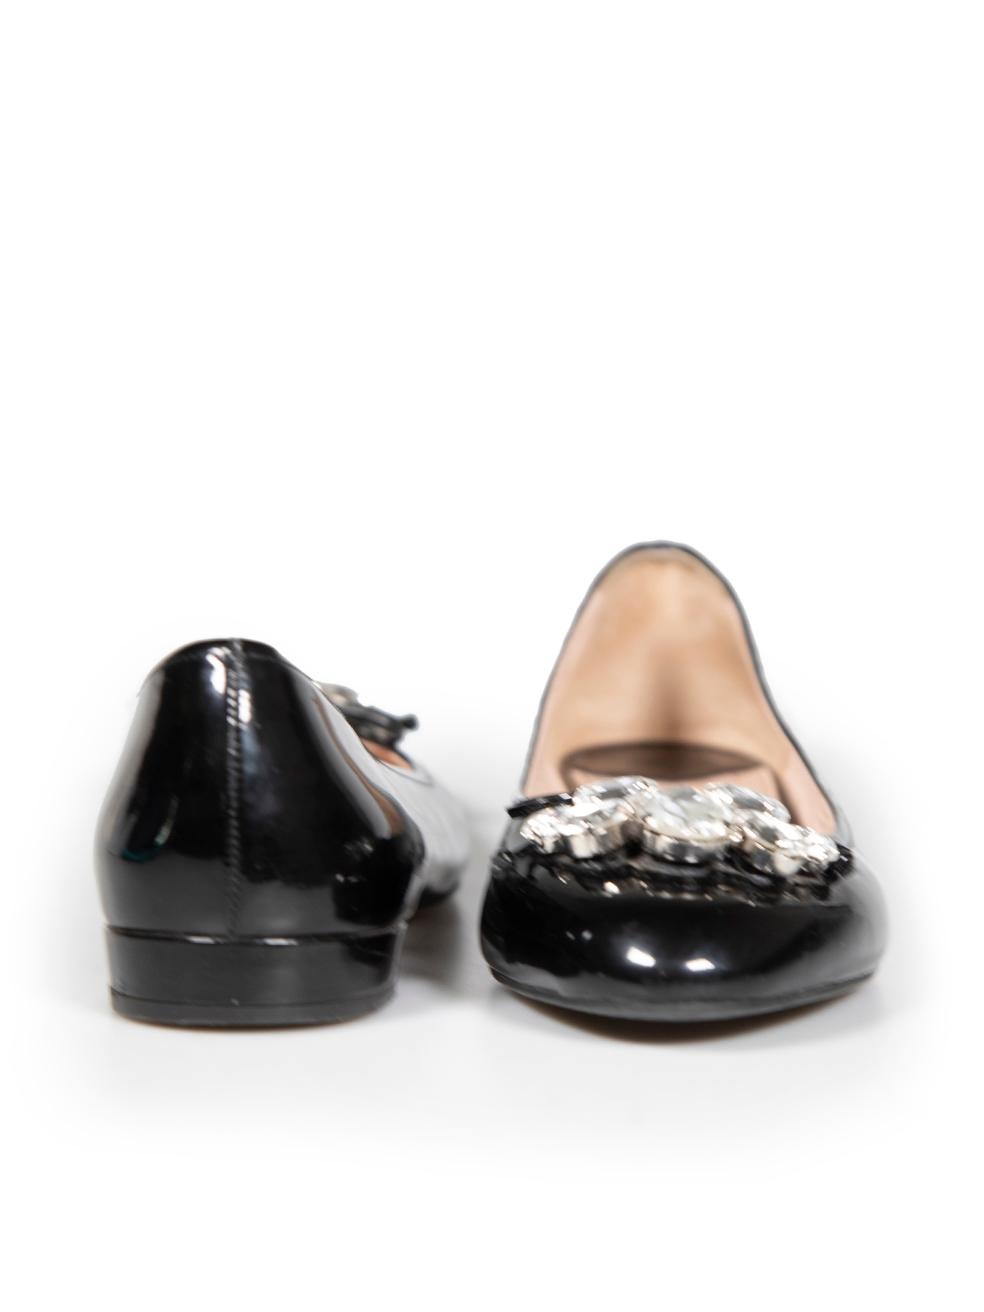 Miu Miu Black Patent Embellished Ballet Flats Size IT 40 In Good Condition For Sale In London, GB